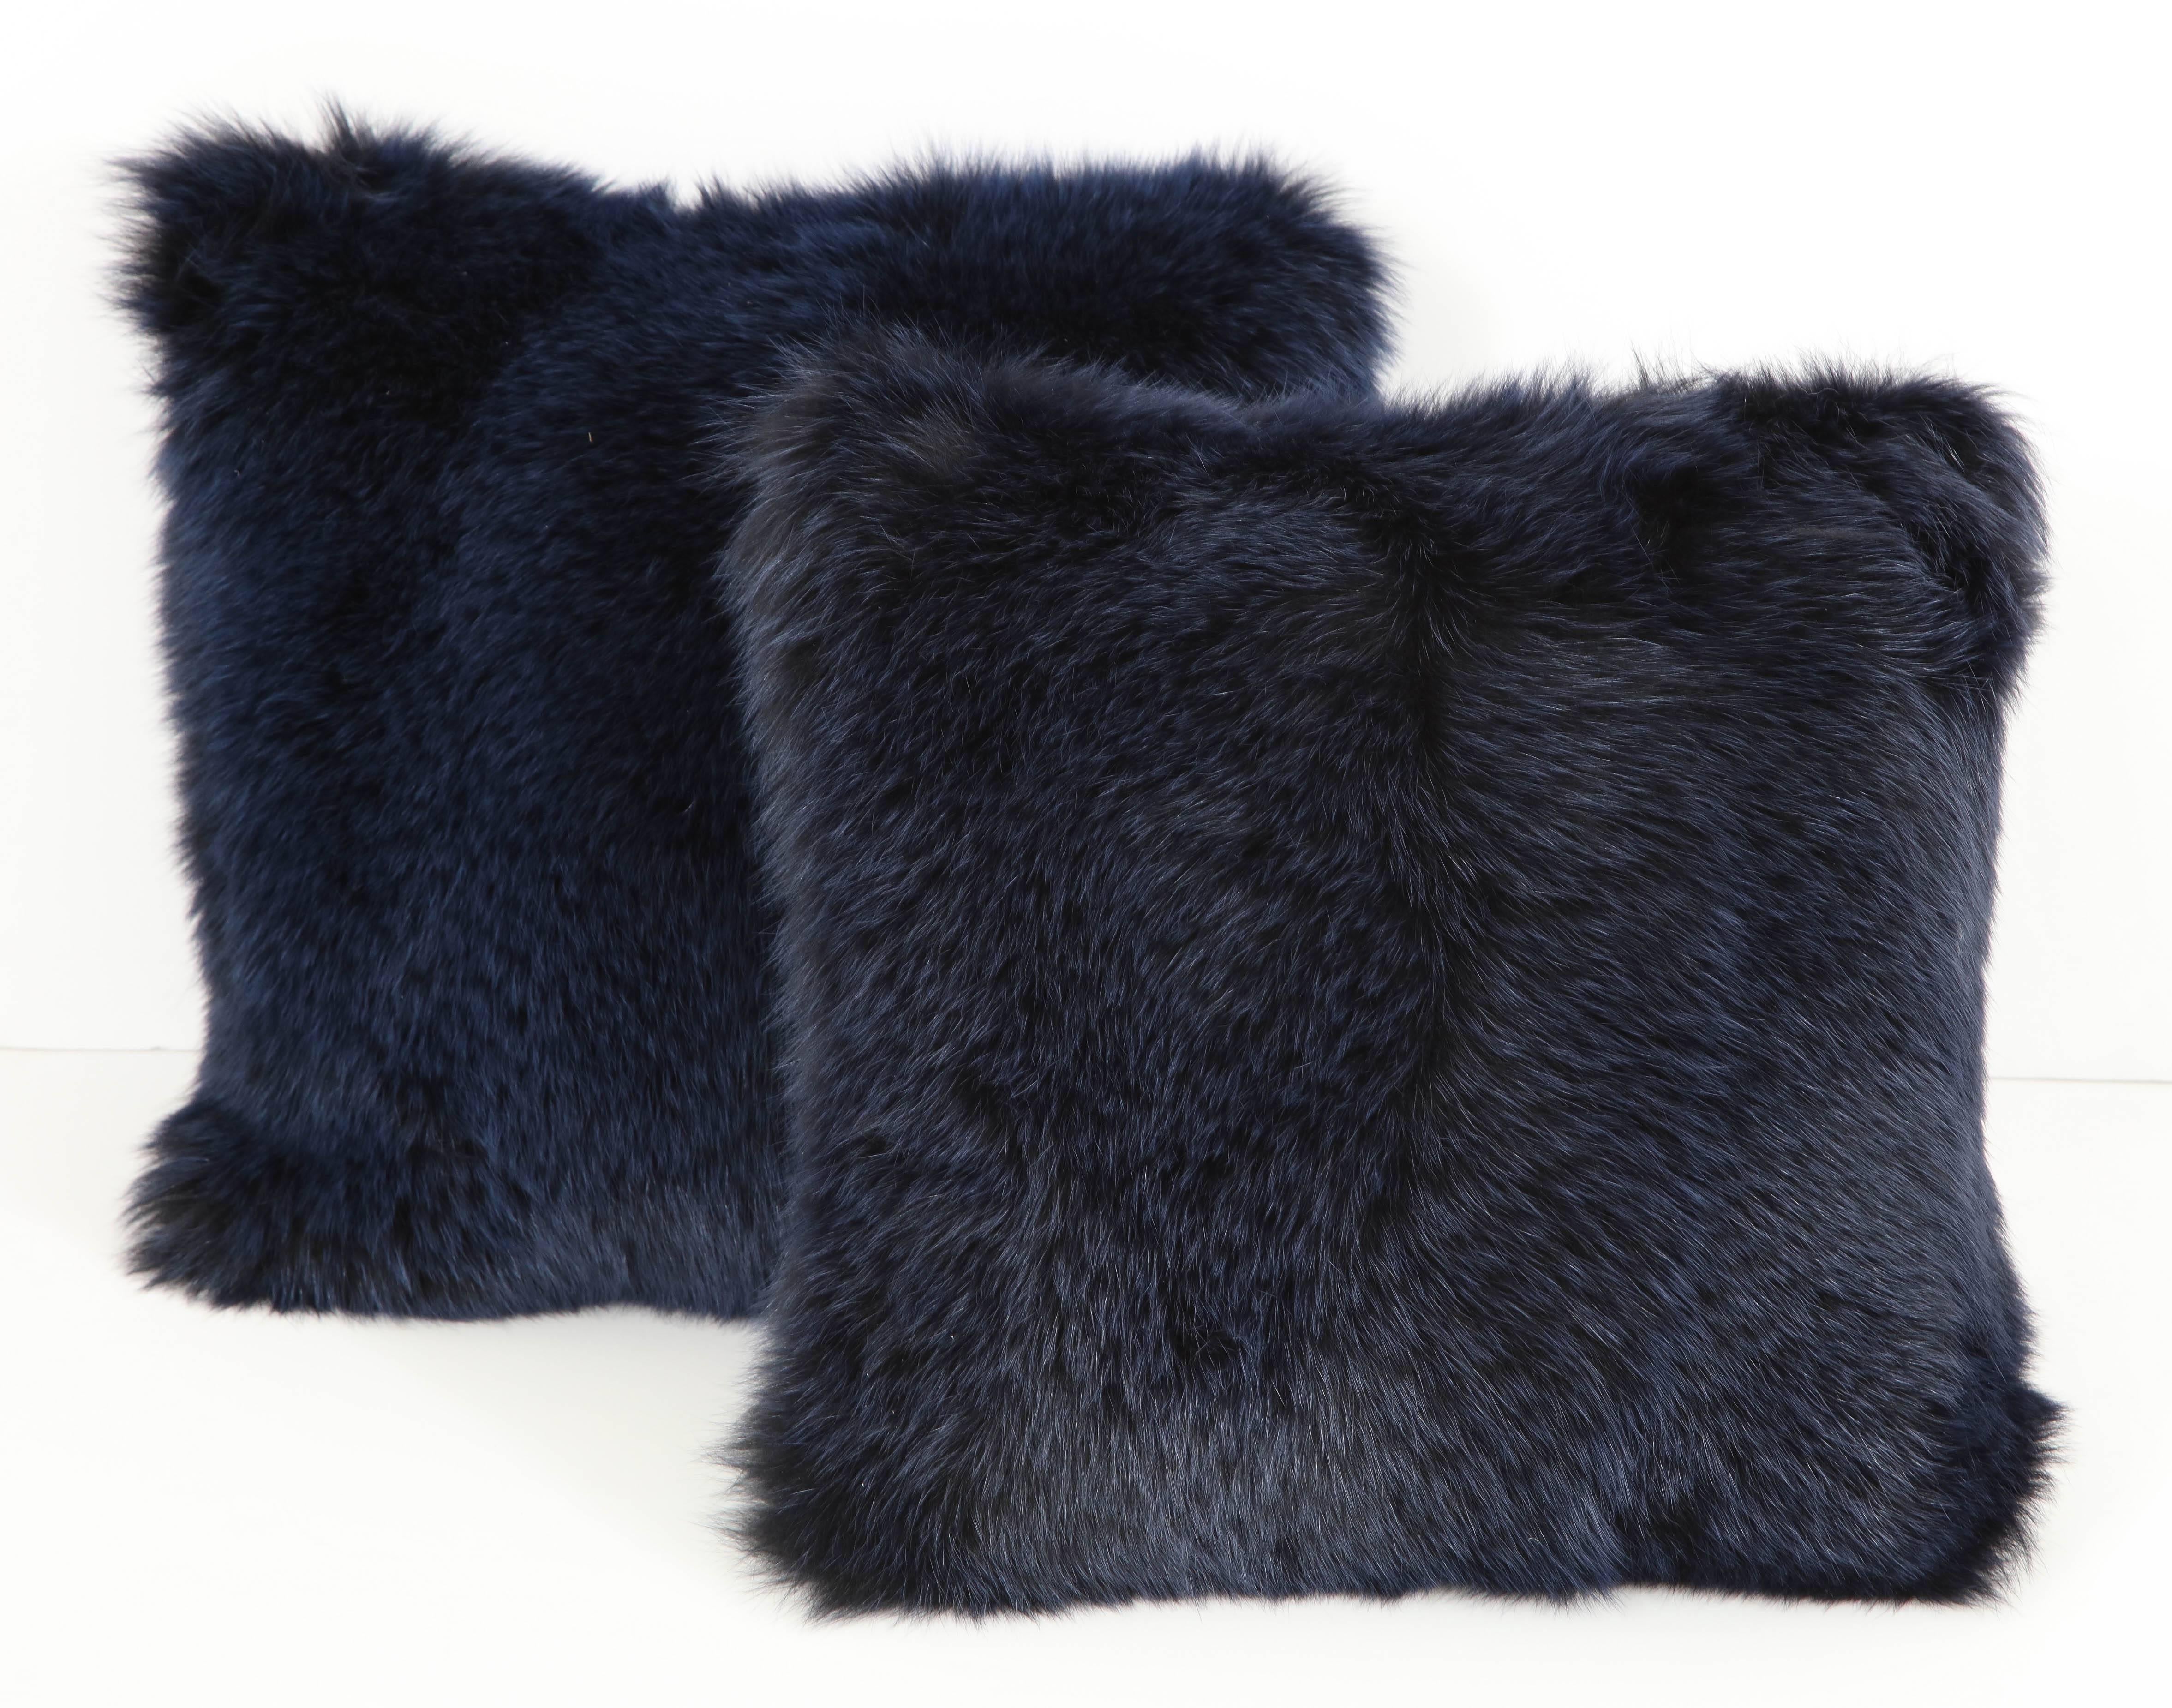 A pair of glamorous and luxurious fox fur pillows in a dramatic midnight blue, backed in navy cashmere. The perfect finishing touch to a room!